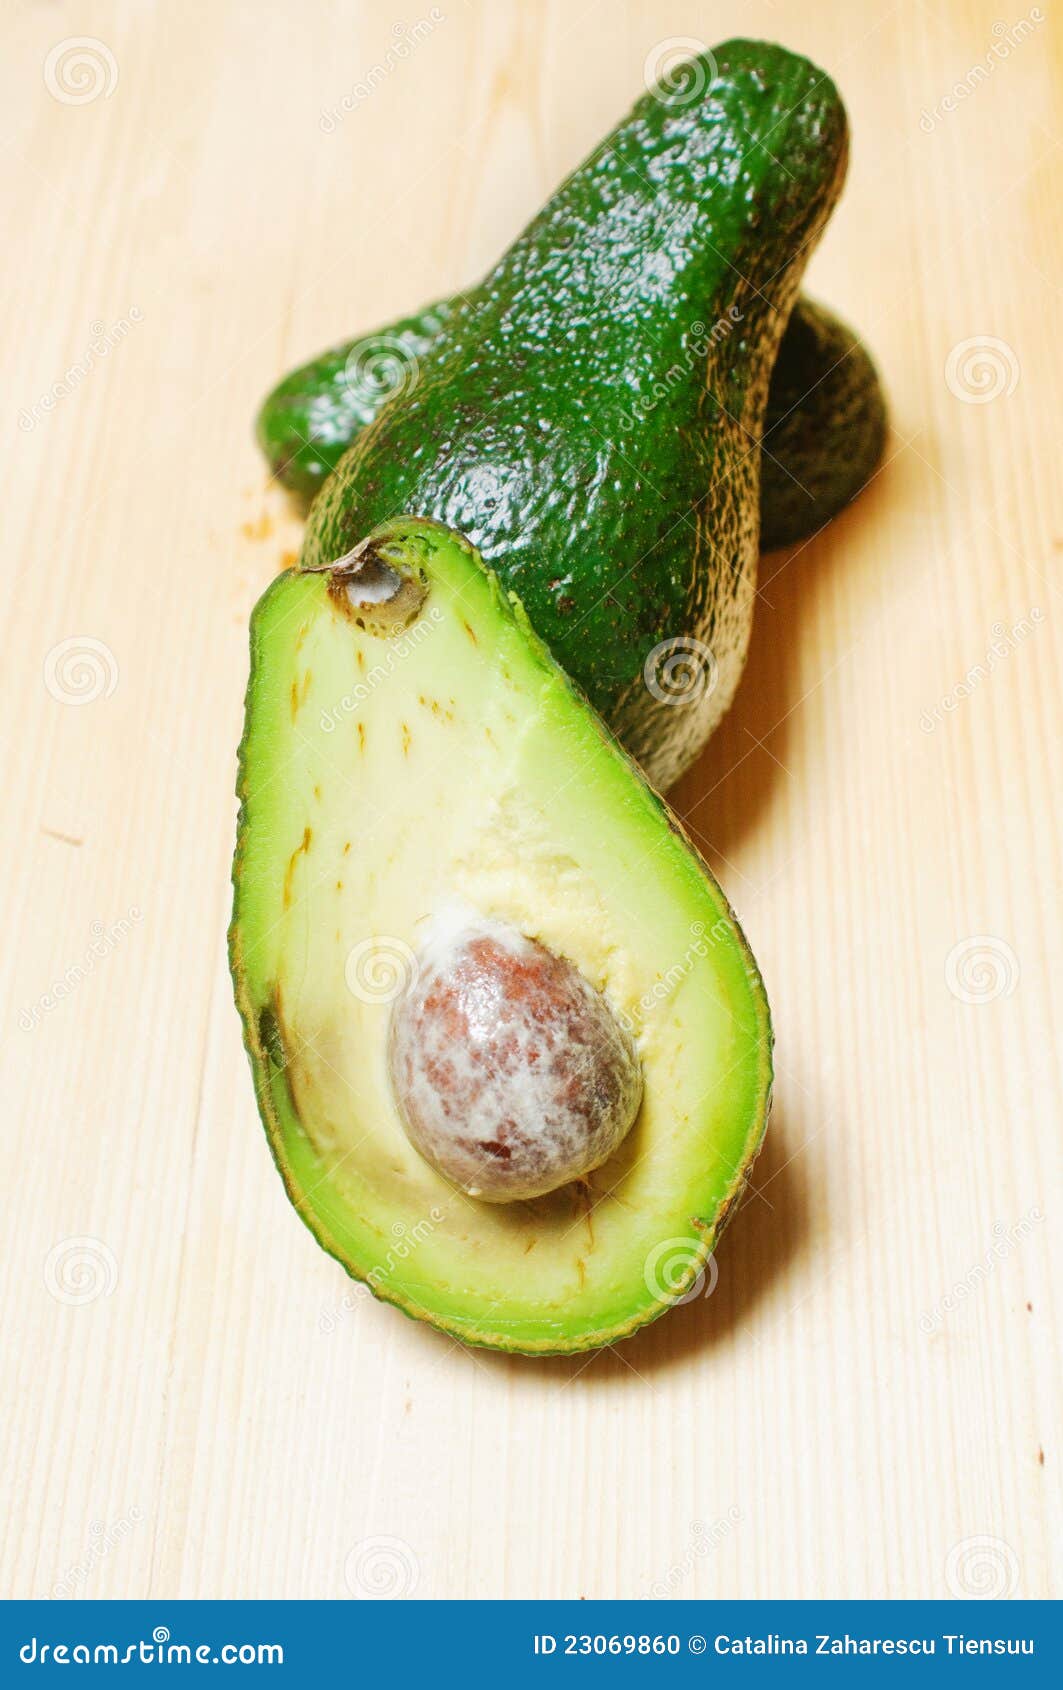 30+ Rotten Avocado Stock Videos and Royalty-Free Footage - iStock